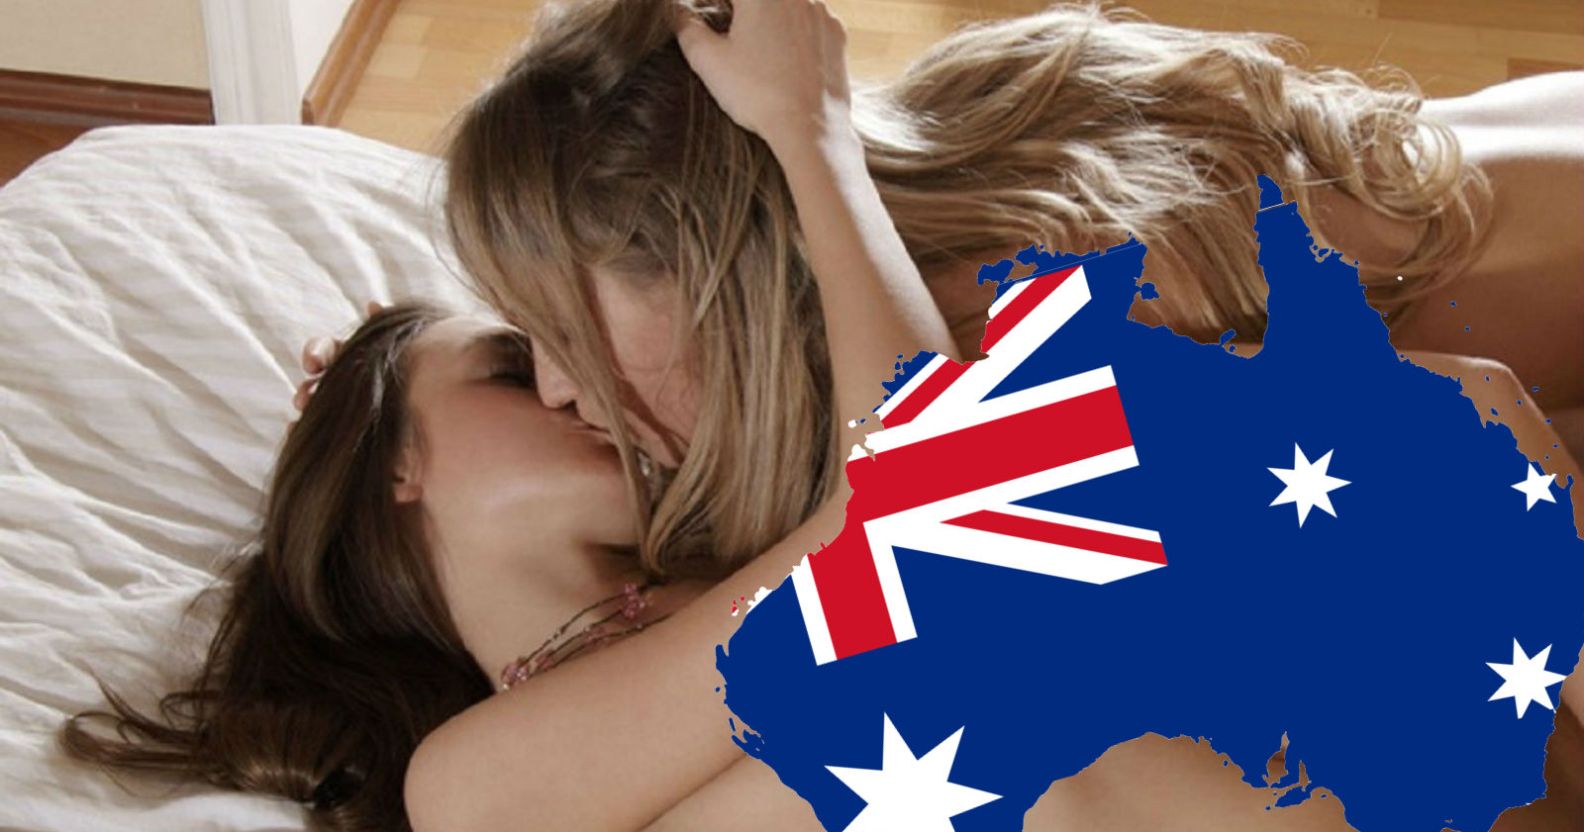 Married Lesbian Sex - Australia watched a ton of lesbian porn while blocking their right to marry  | PinkNews